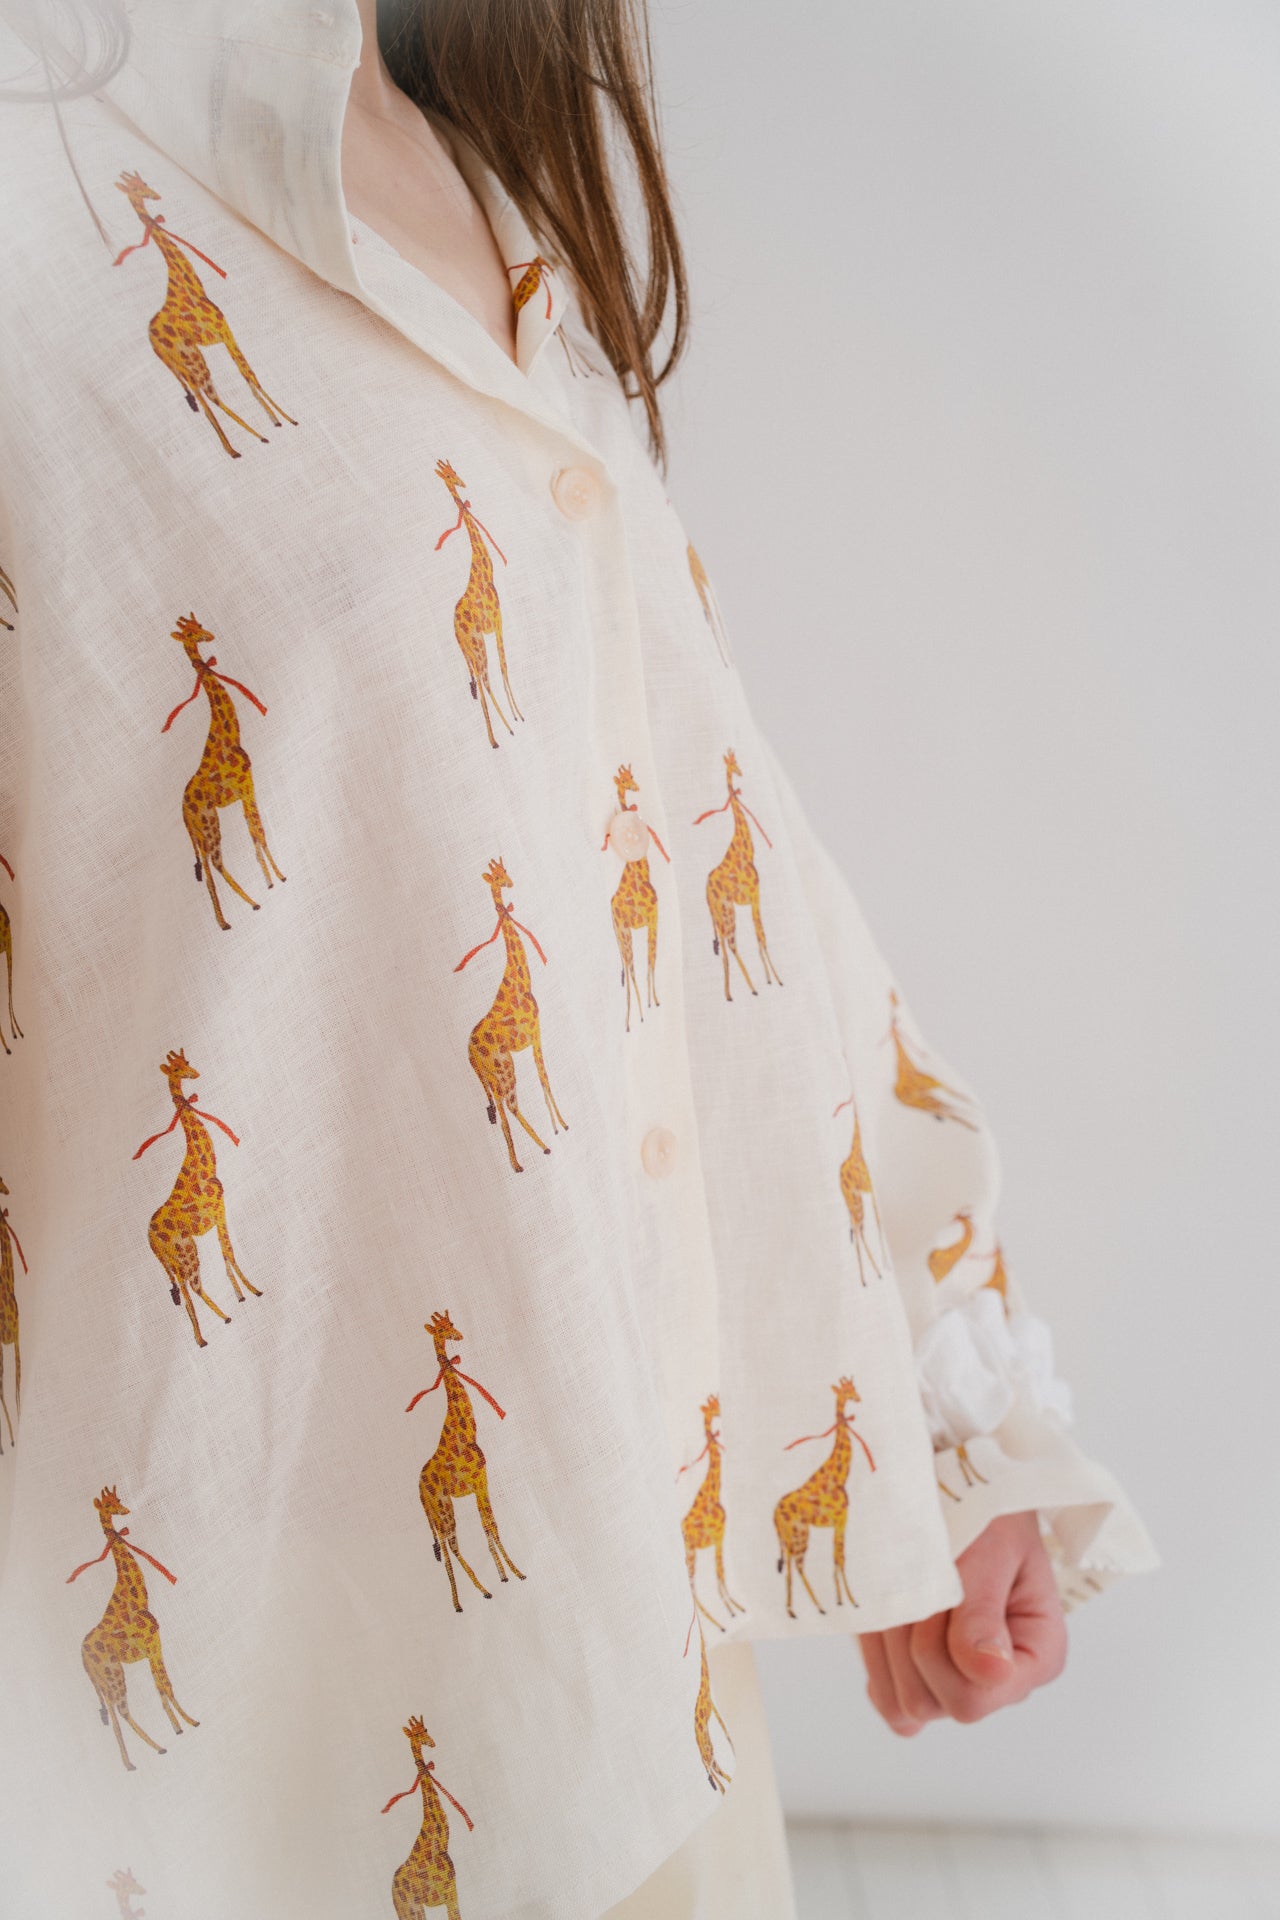 GIRAFFE PRINT SHIRT | Our most playful and fun piece from our SS24 collection. Our ‘Into The Wild’ concept was born out of an interest in the symbolism of the giraffe. Printed from a hand drawn watercolour painting by our designer Amy. Design adapted from